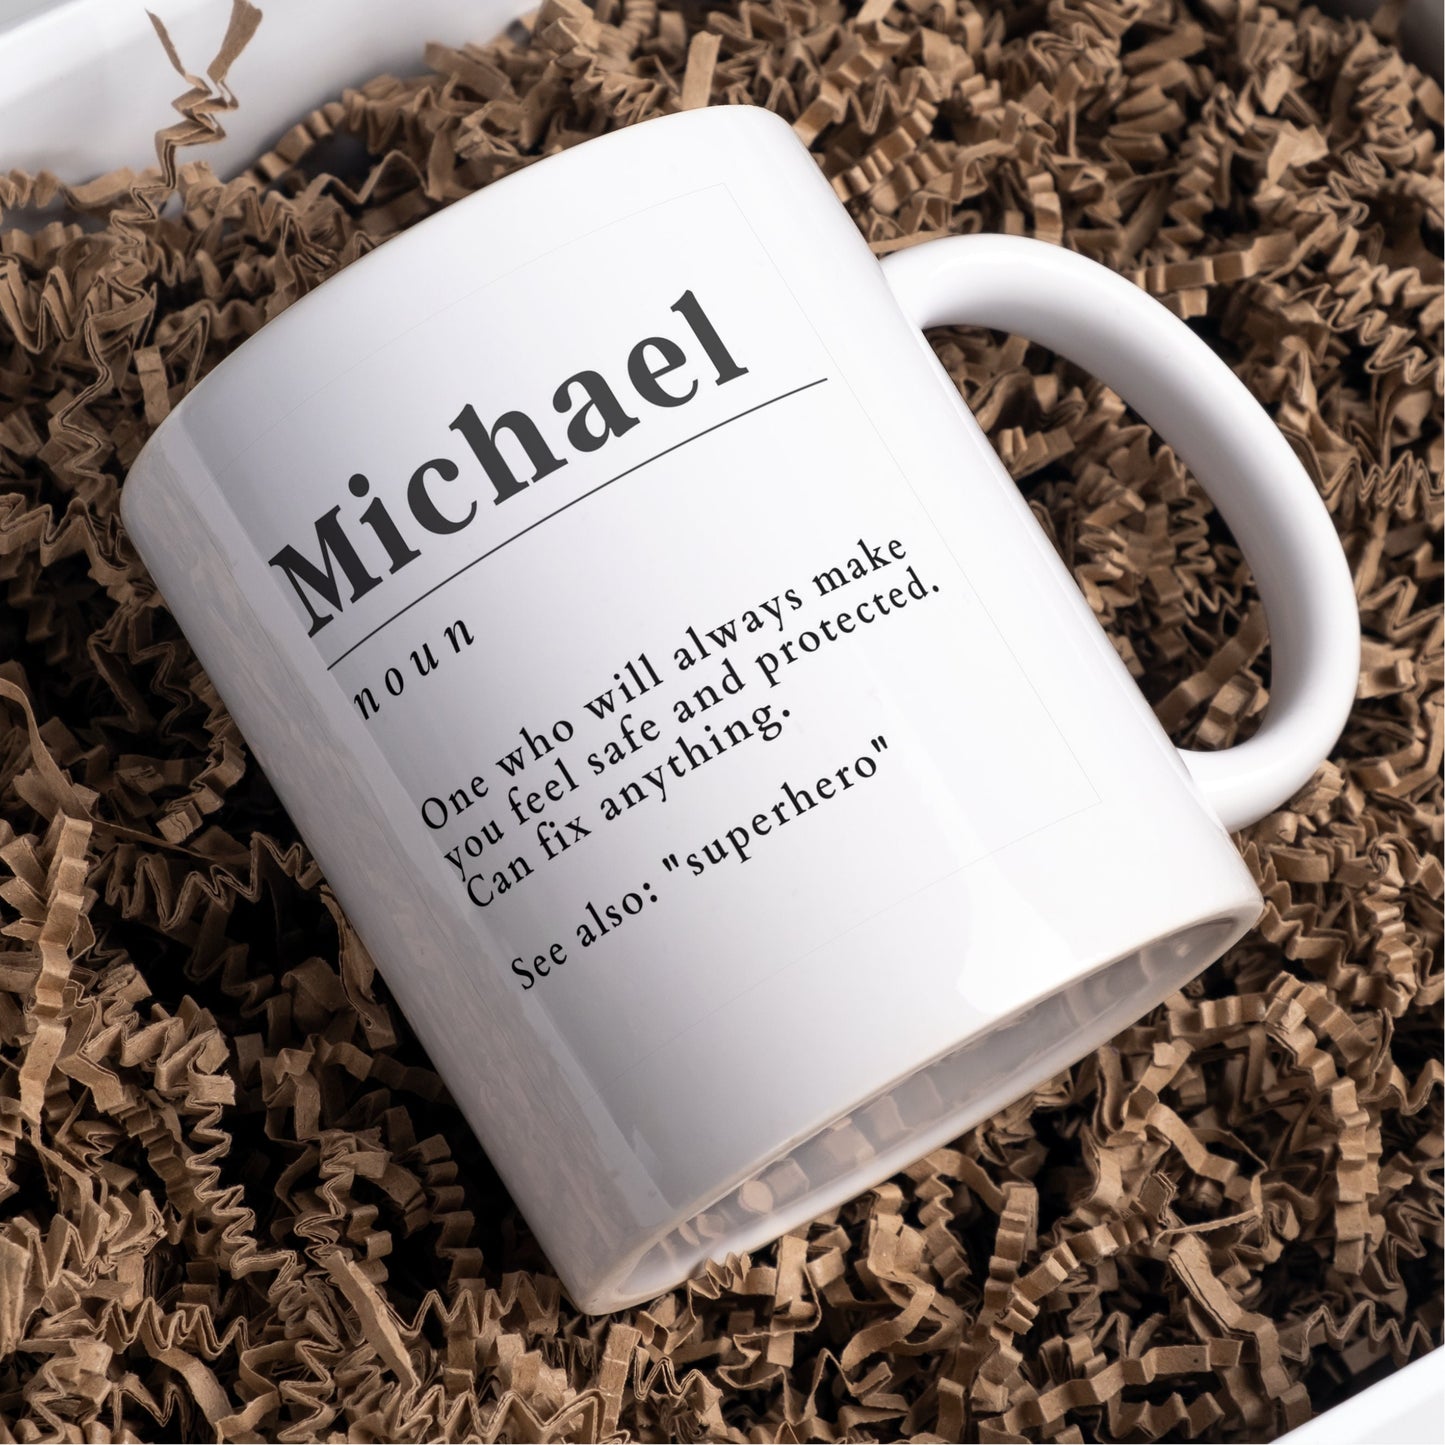 Personalised name mug, printed to order with your words if you'd like?